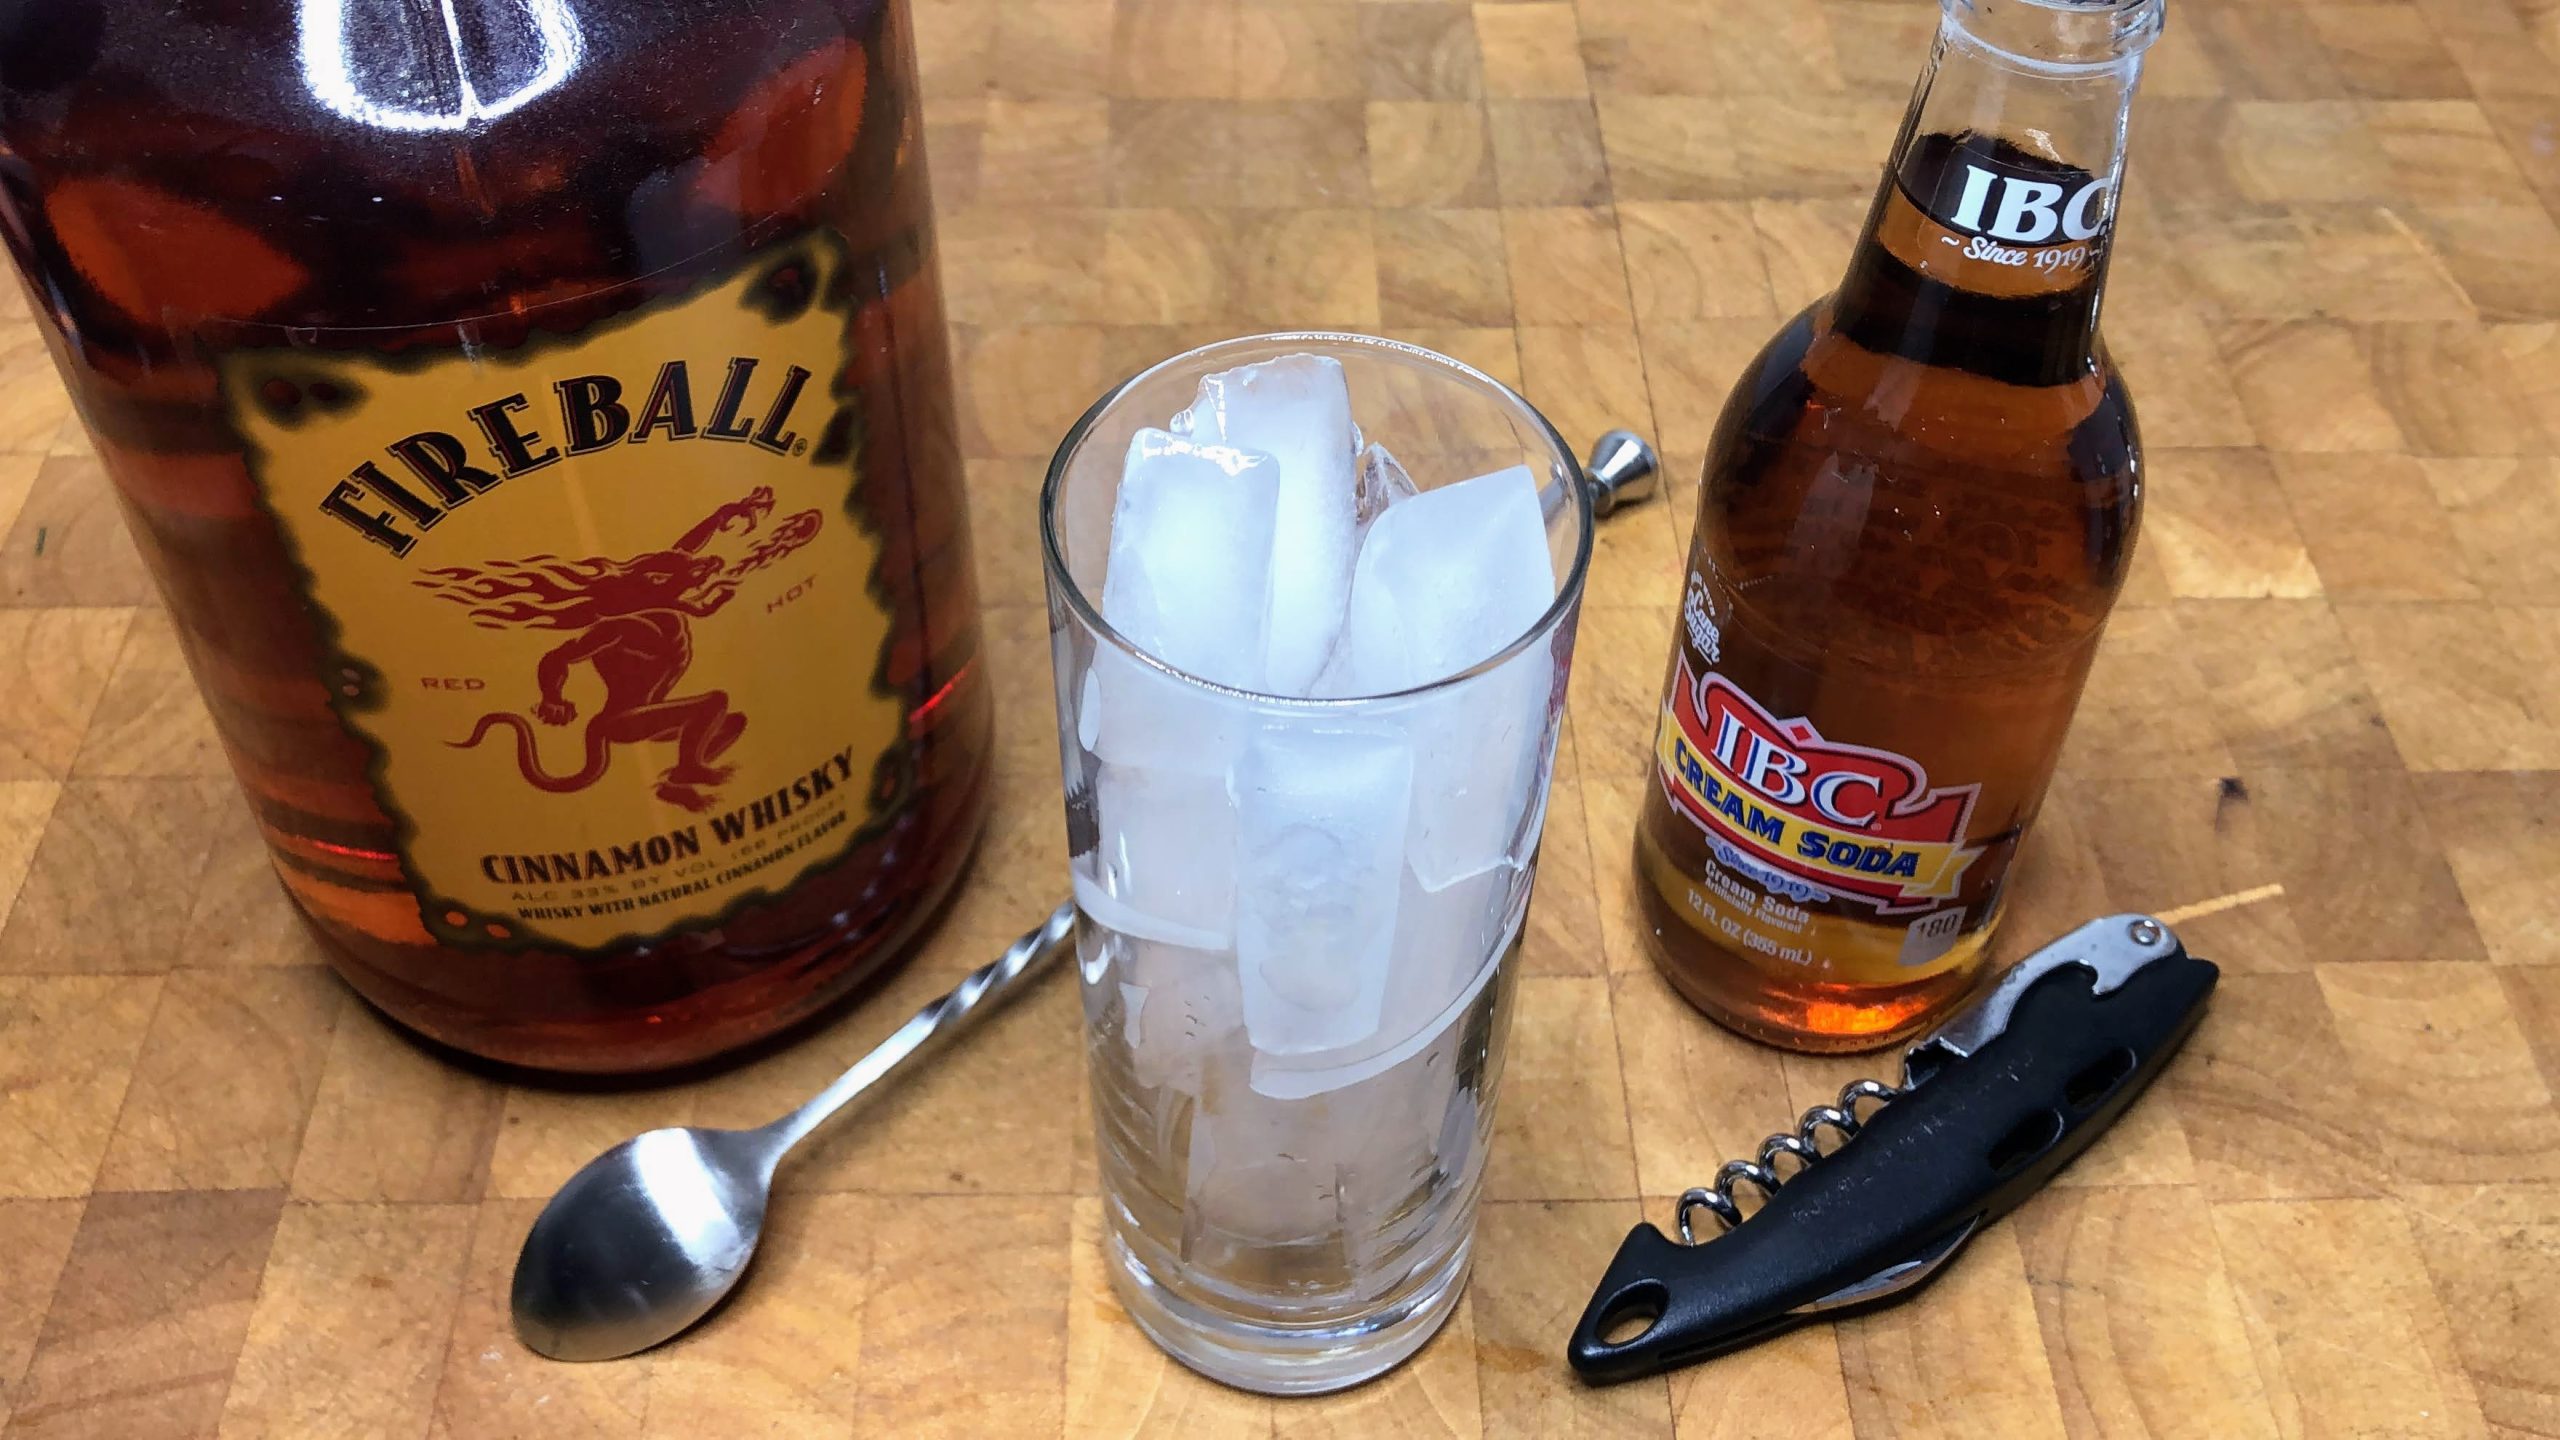 highball glass with ice next to bottle opener, bar spoon and bottles of fireball and cream soda